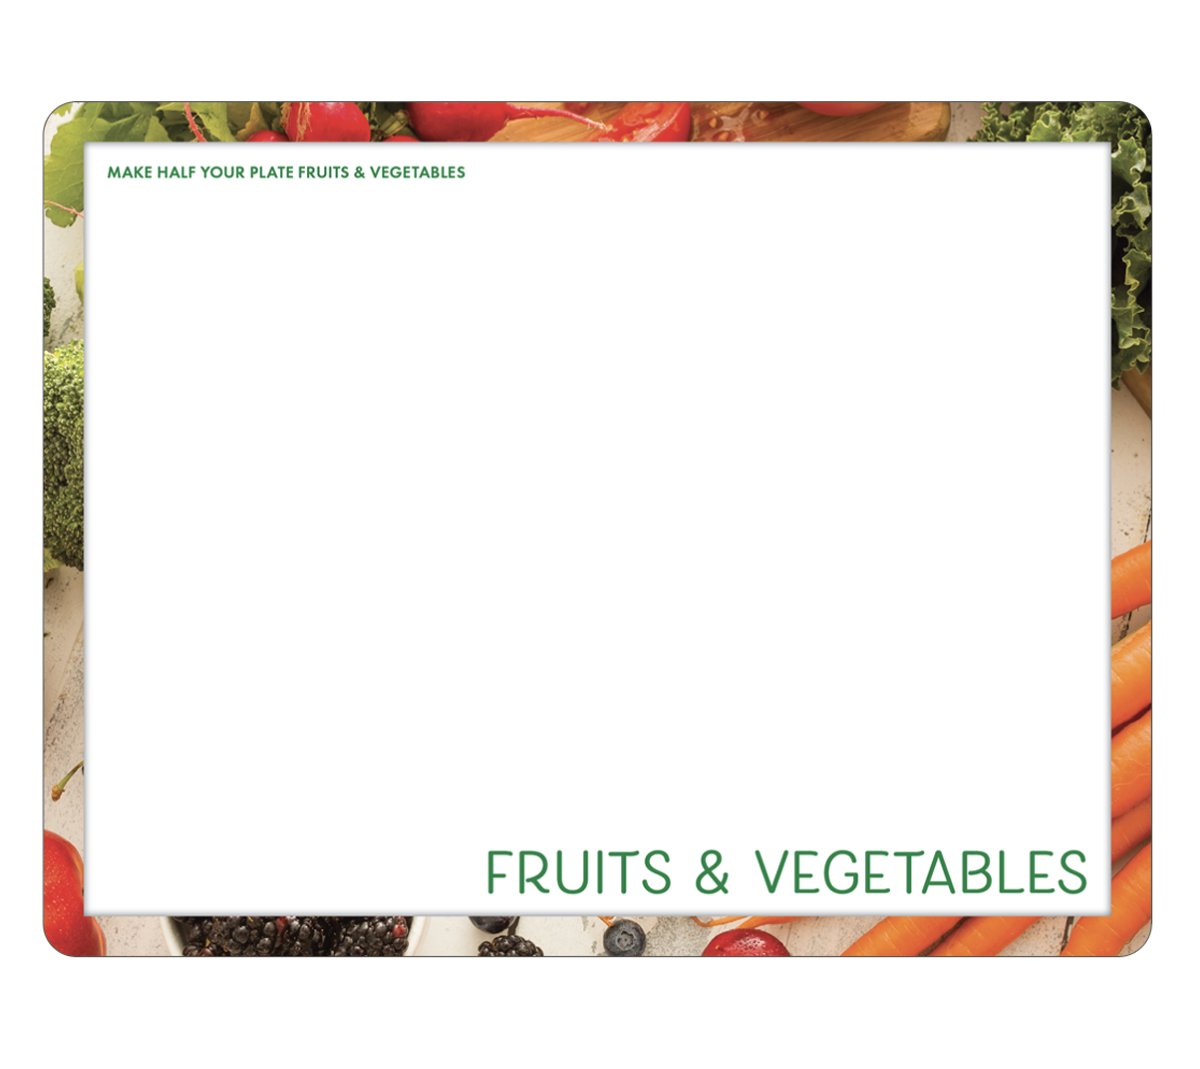 Fruit and Vegetable Safety